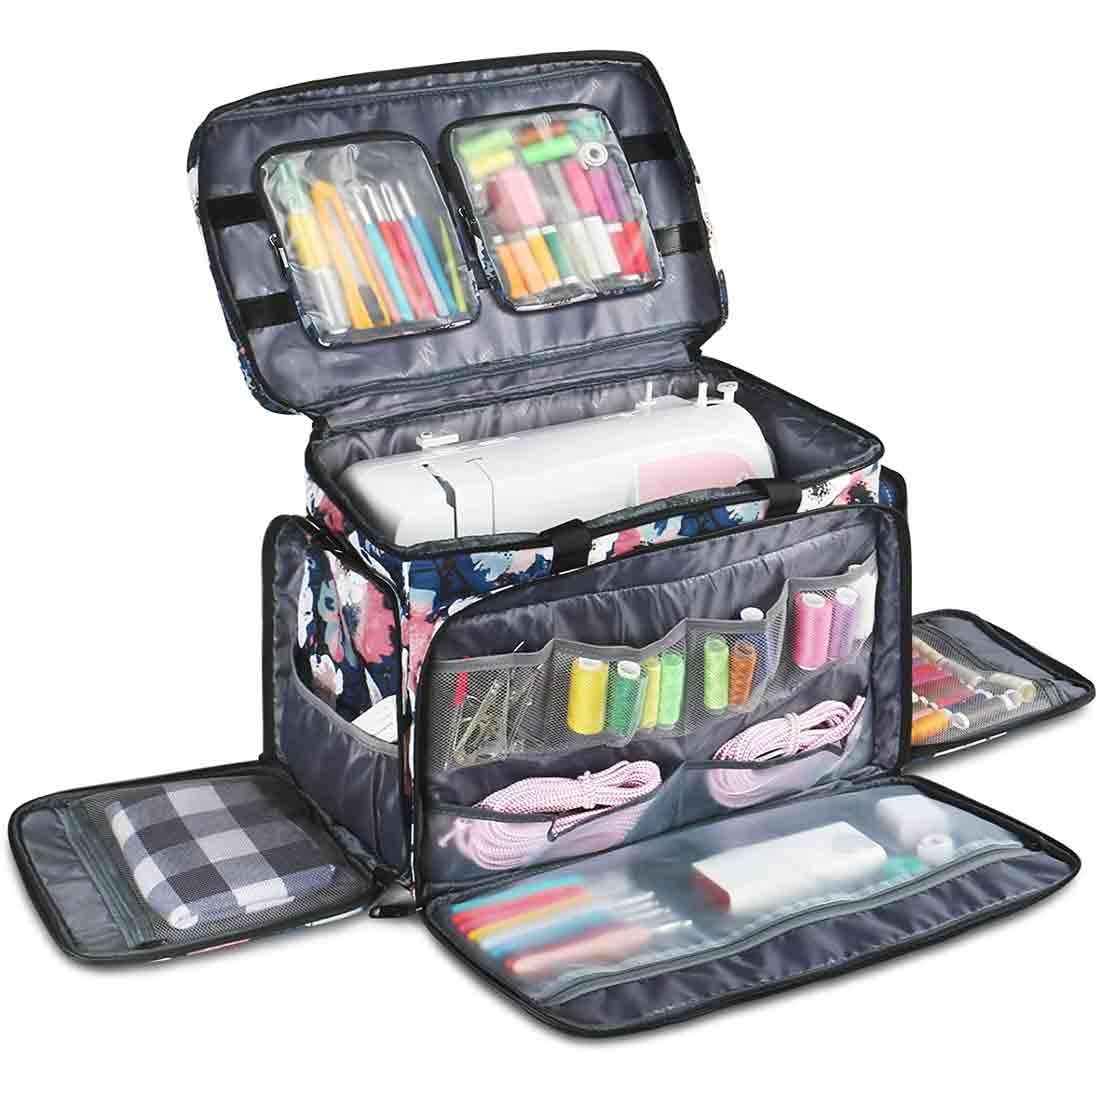 Dust Cover for Sewing Machine Waterproof Durable Cloth Protective Cover  with Pockets Sewing Accessories Storage Bag